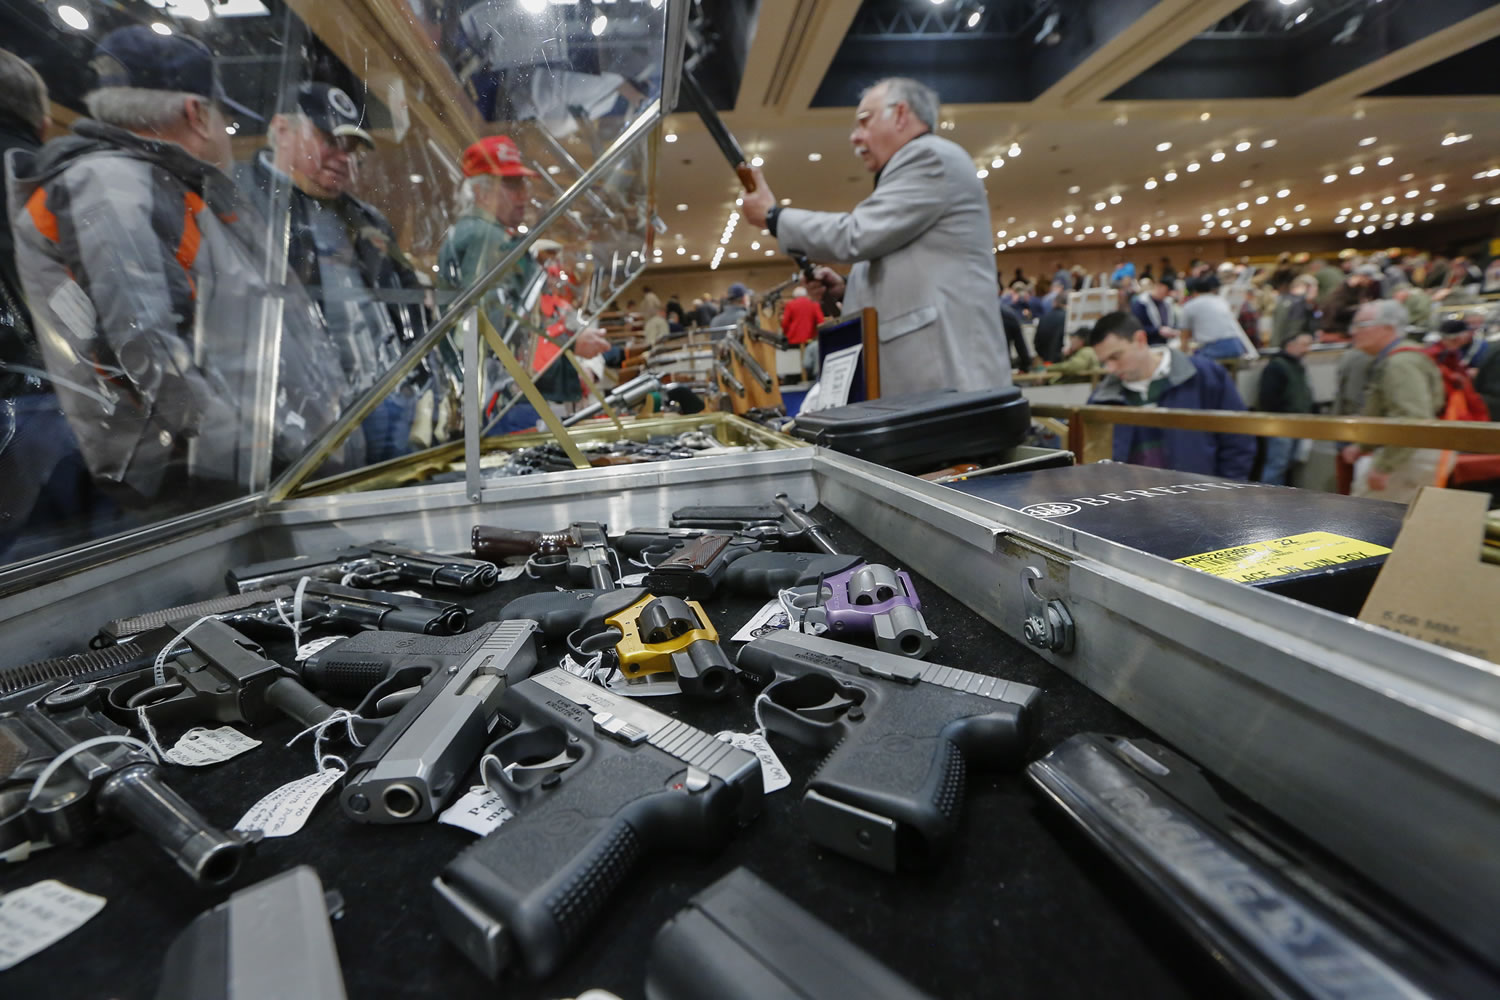 Handguns appear on display at the table of David Petronis of Mechanicville, N.Y., standing with rifle, who owns a gun store, during the heavily attended annual New York State Arms Collectors Association Albany Gun Show at the Empire State Plaza Convention Center in Albany, N.Y.